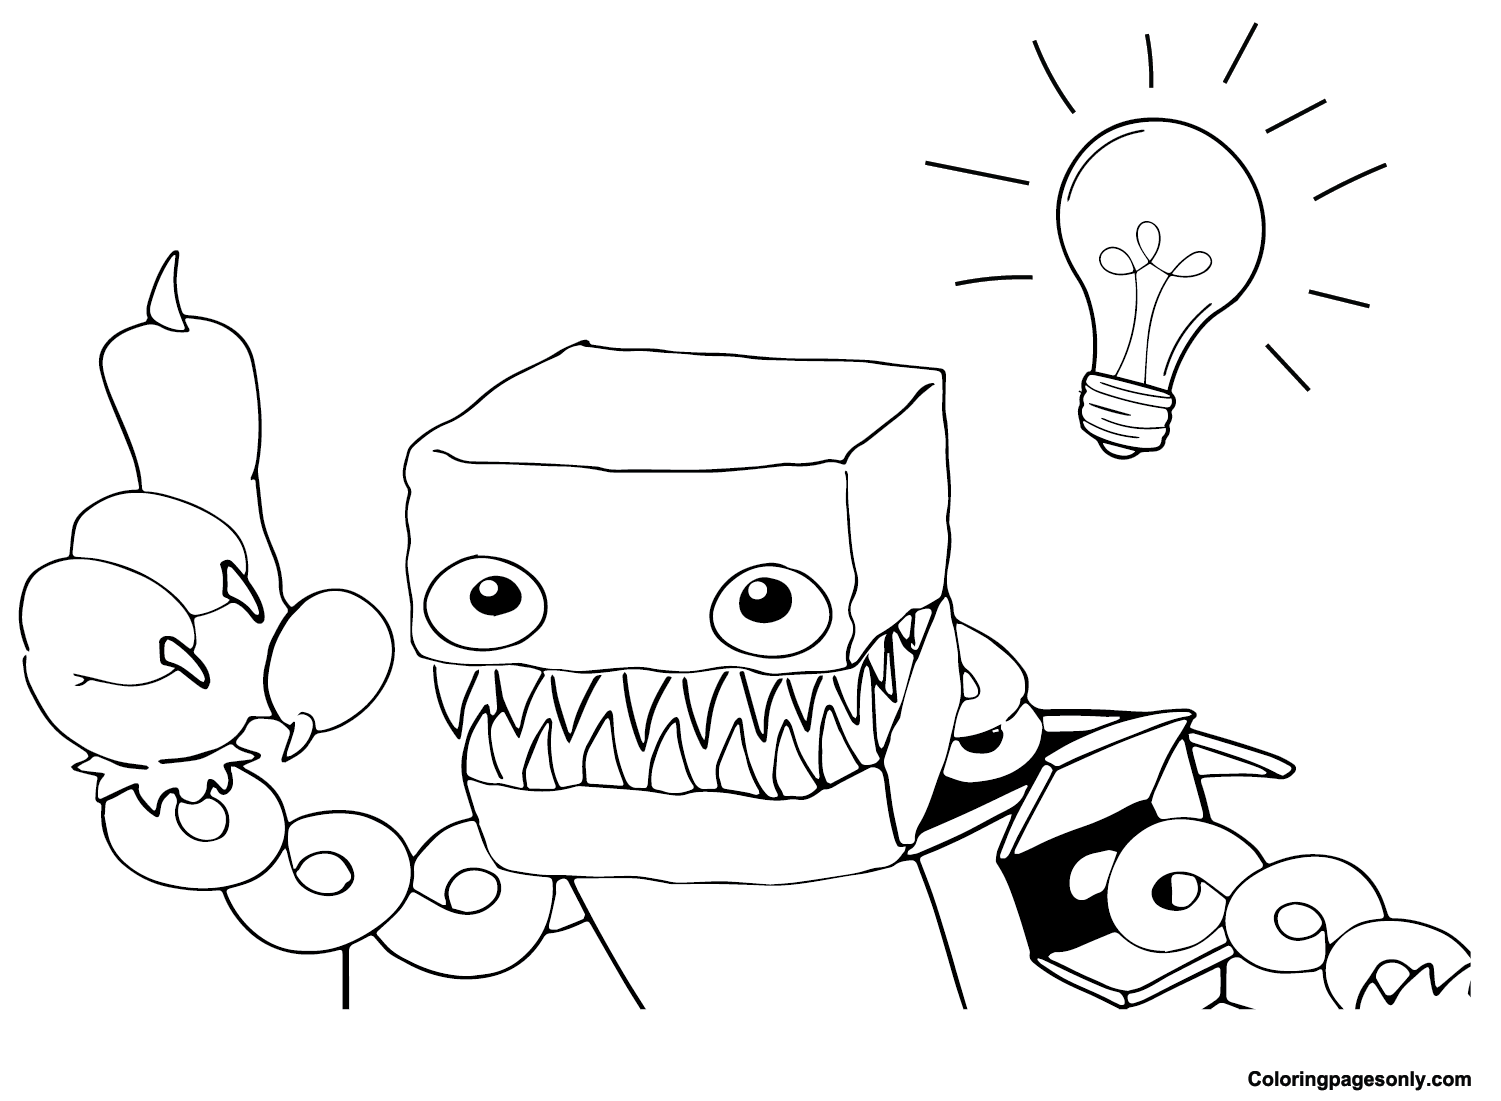 Pictures of Boxy Boo Coloring Page